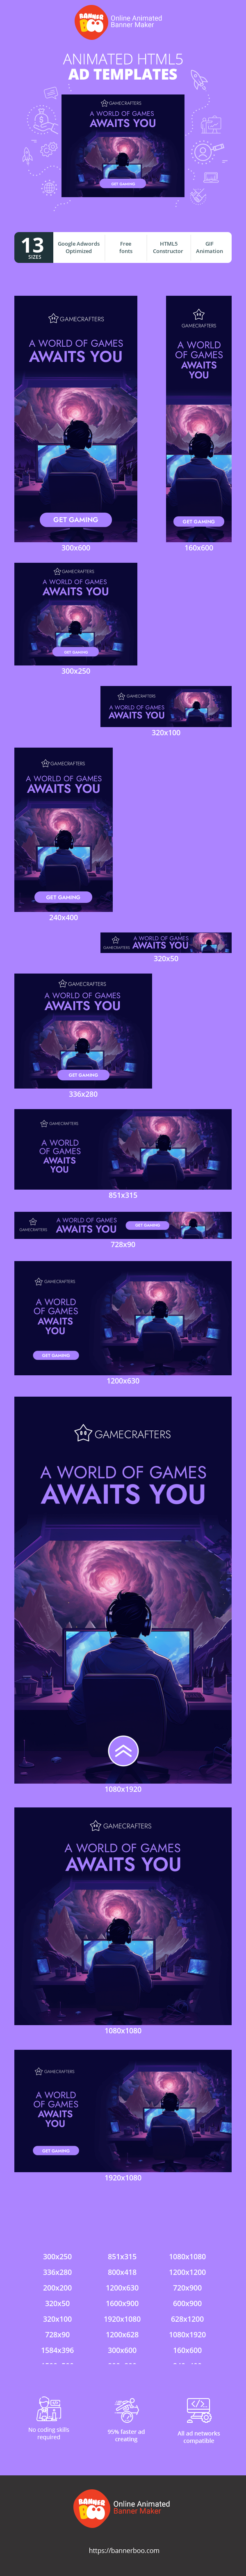 Banner ad template — A World Of Games Awaits You — Gaming